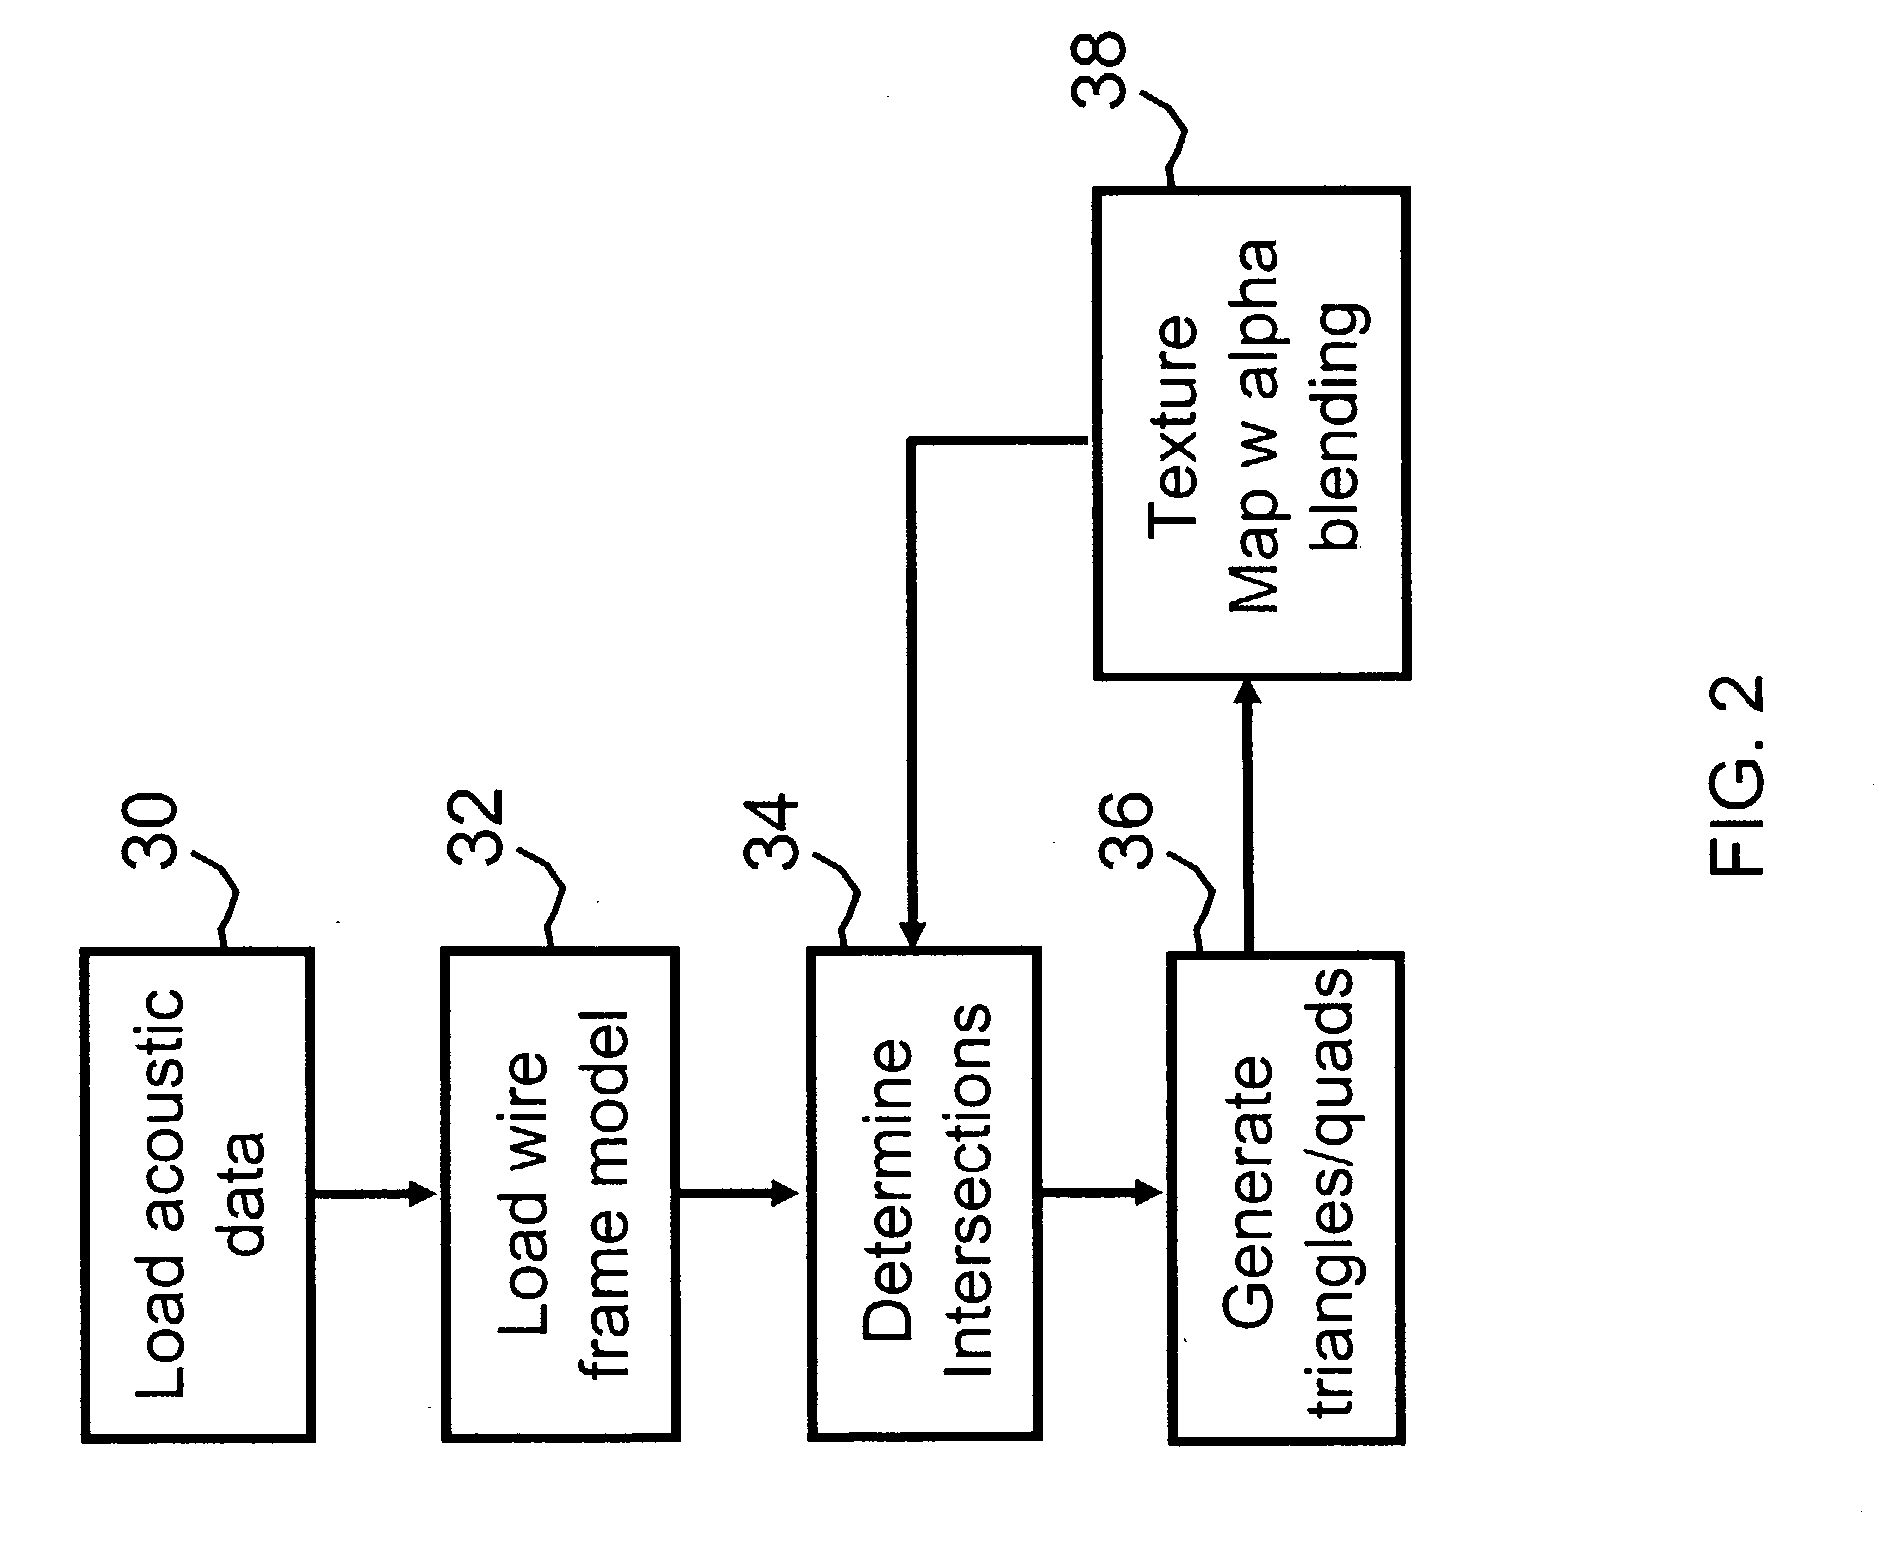 Volume rendering in the acoustic grid methods and systems for ultrasound diagnostic imaging